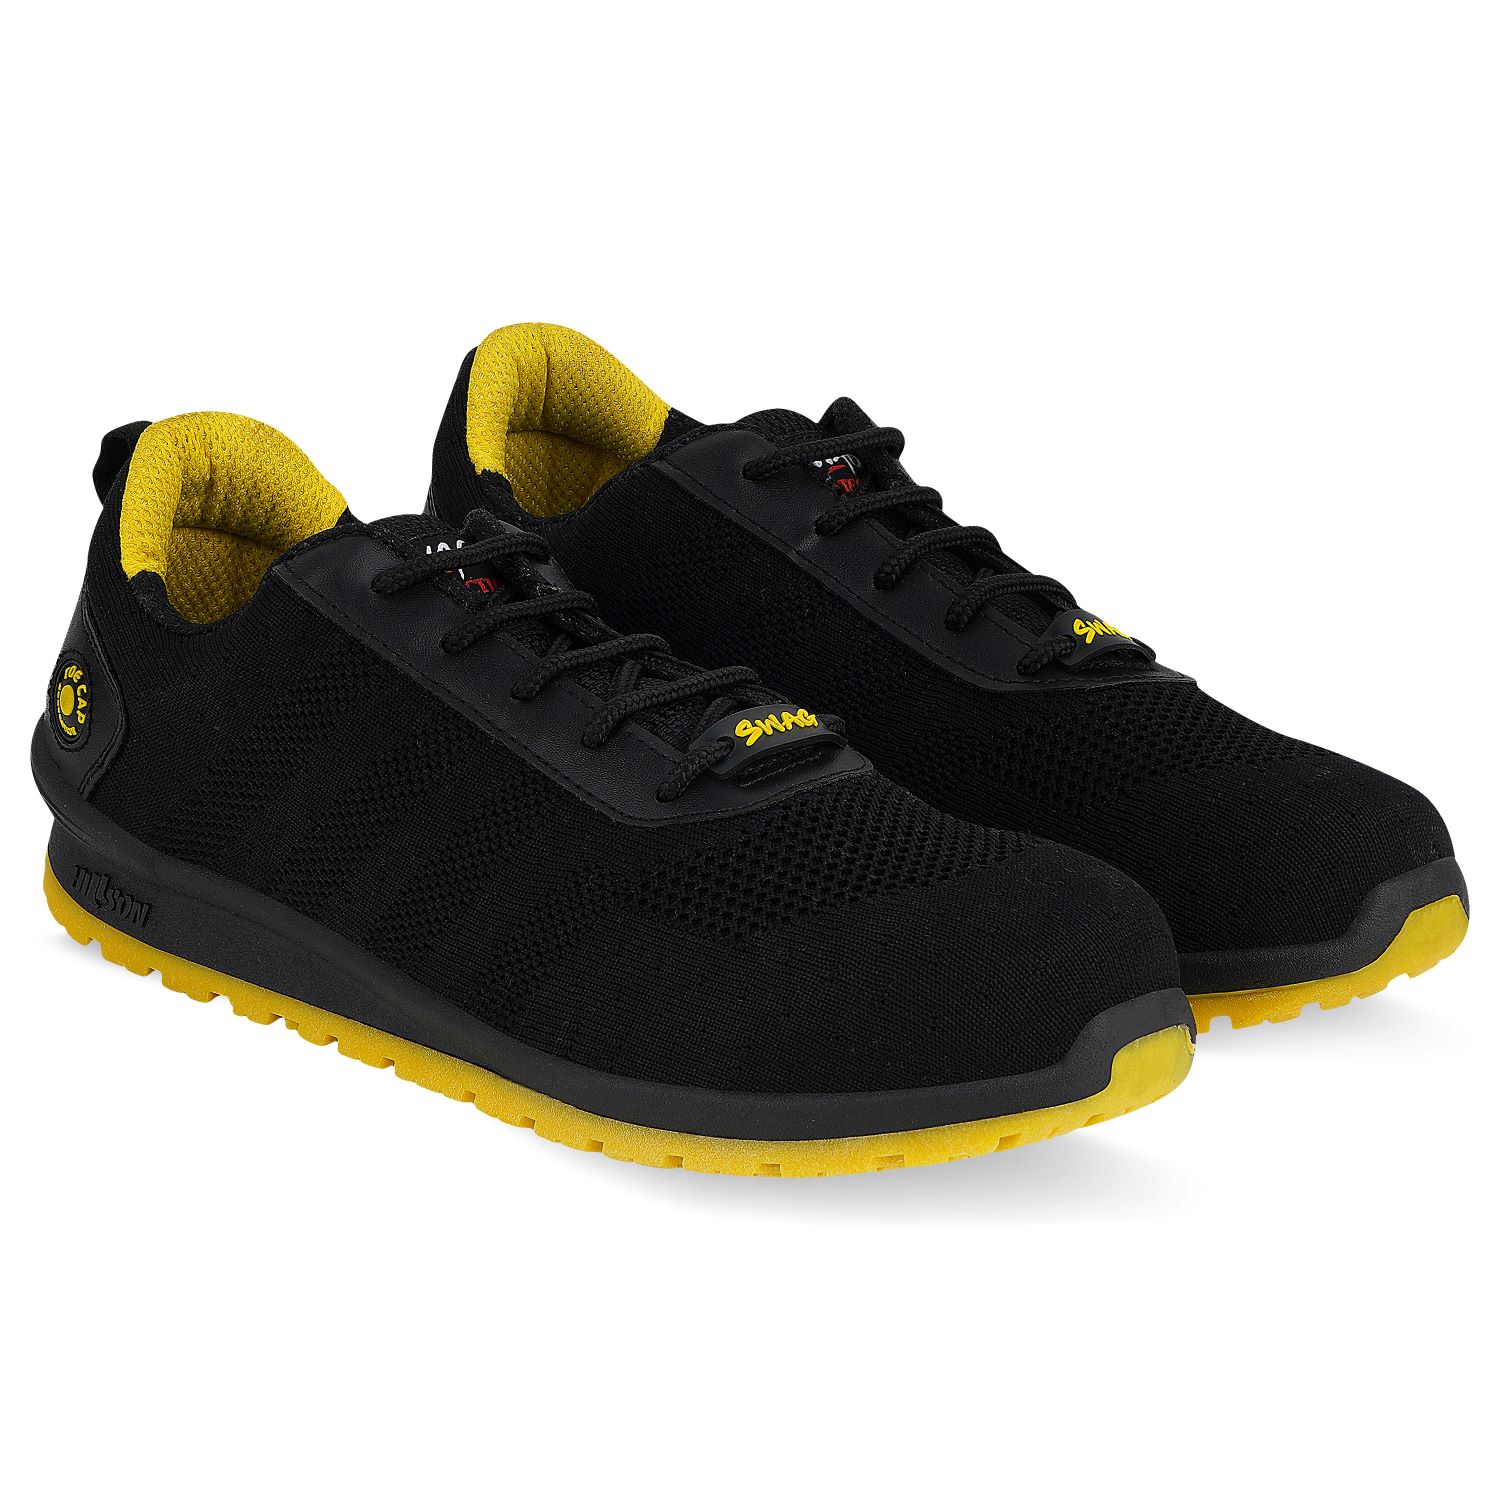 Buy Hillson Swag 1906 Textile Fabric Steel Toe Safety Shoes Black online at  best rates in India | L&T-SuFin